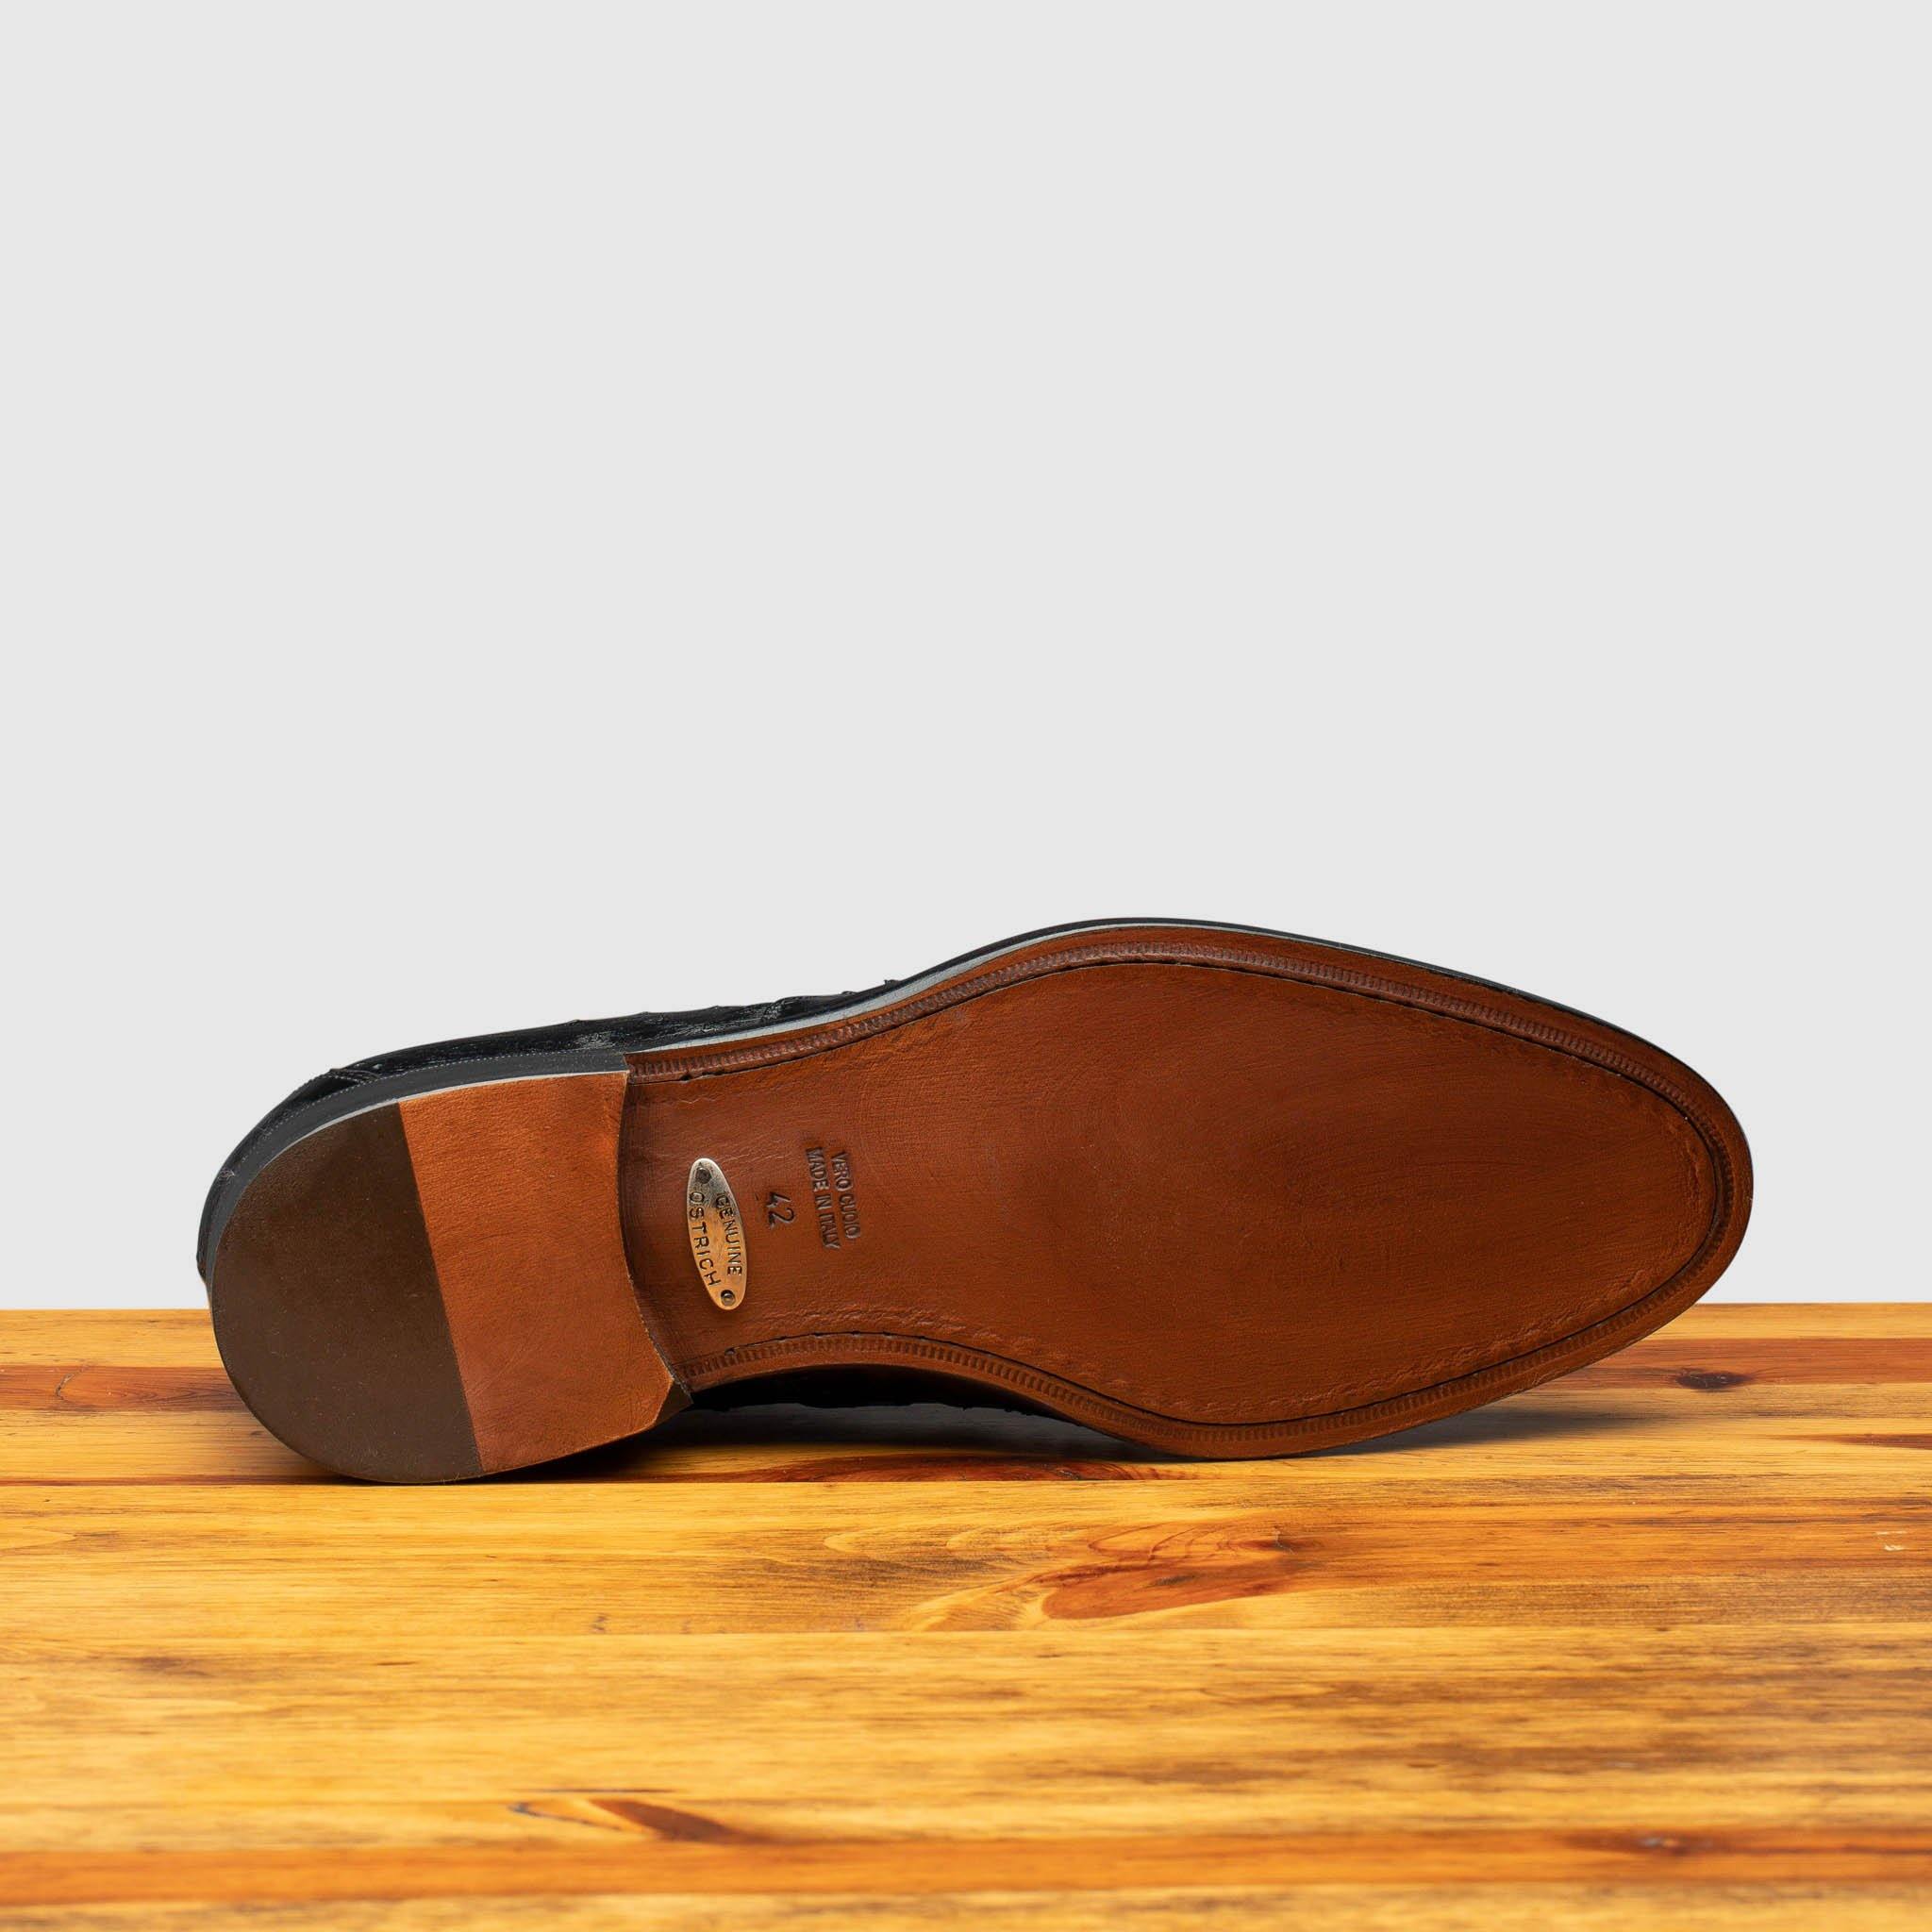 Full leather outsole of H777 Calzoleria Toscana Black Ostrich Cap Toe on top of a wooden table